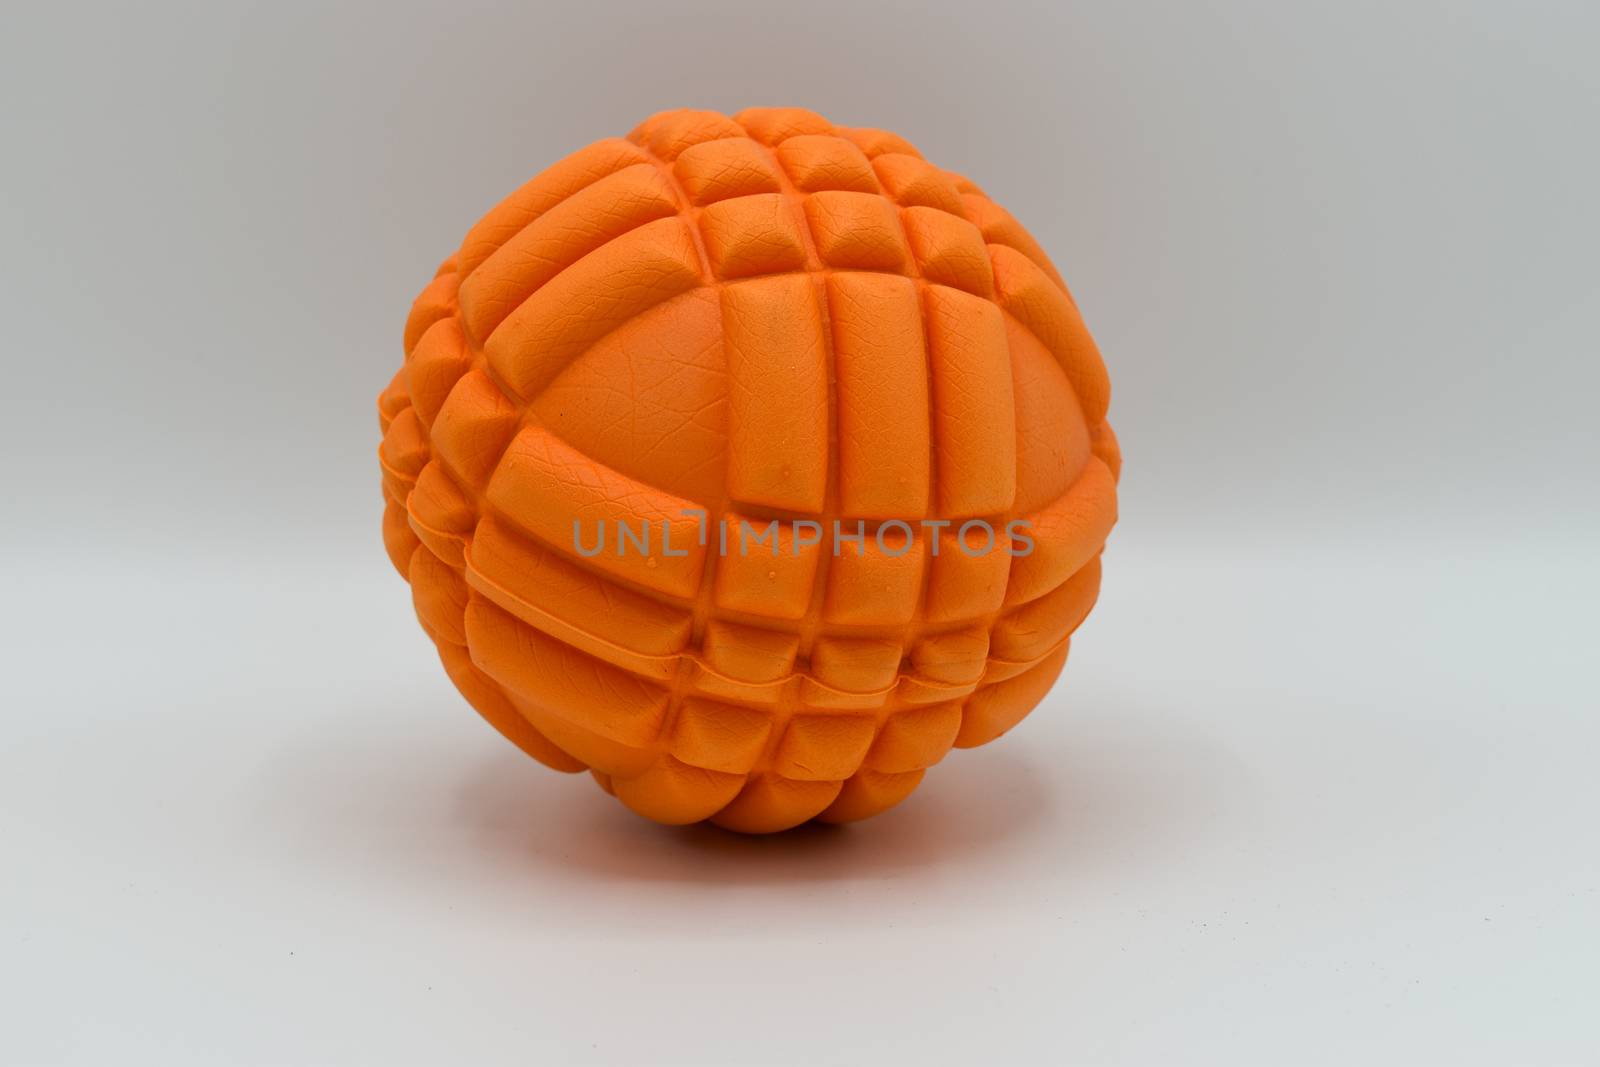 Foam roller ball isolated on white background